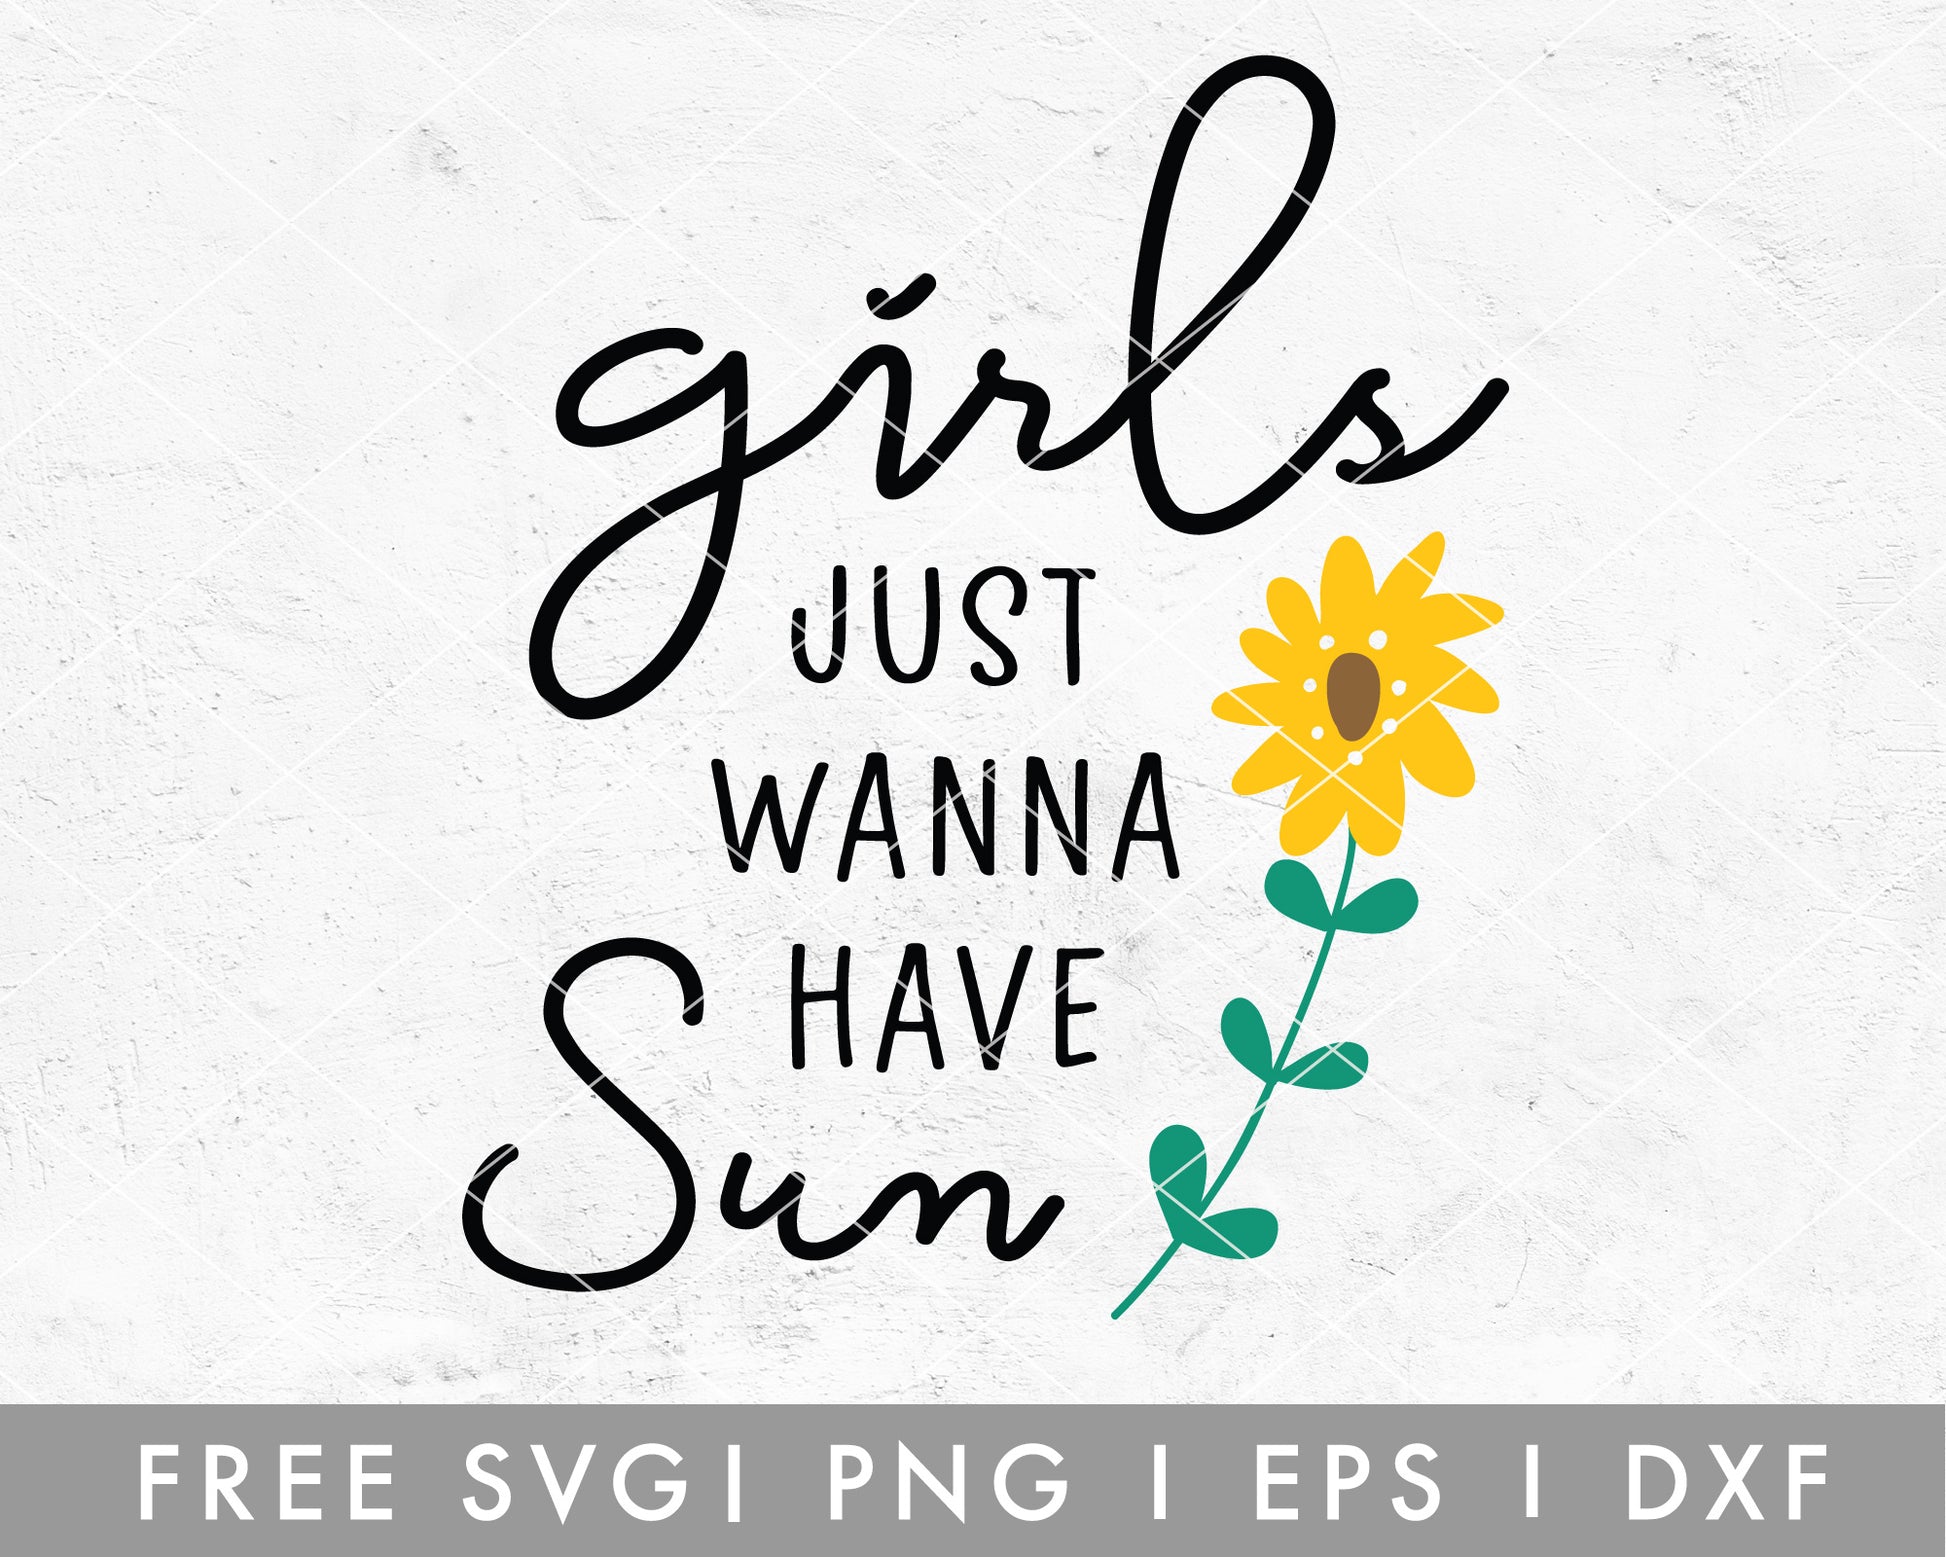 FREE Girls Just Wanna Have Sun SVG Cut File for Cricut, Cameo Silhouette | Free SVG Cut File